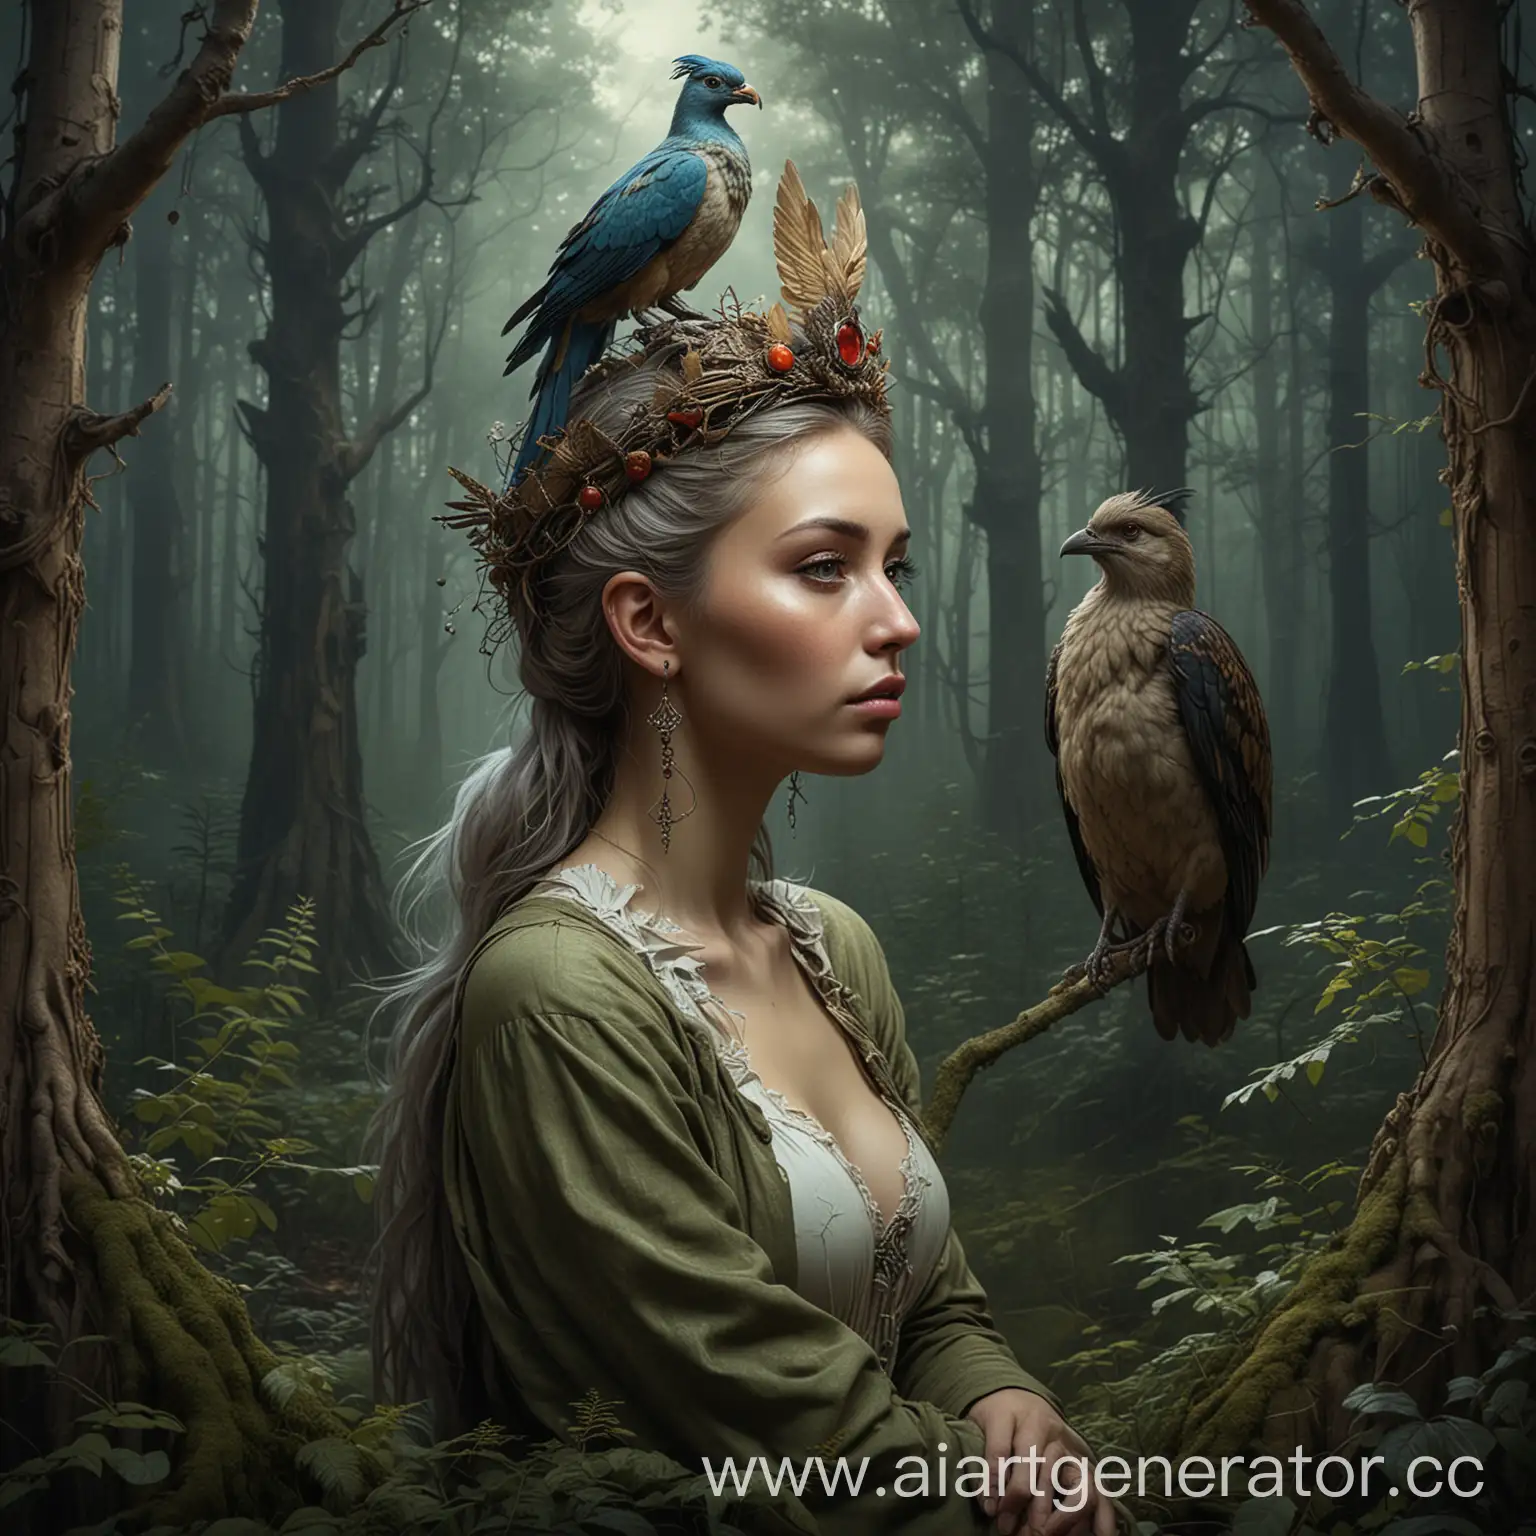 Fairy-tale style Bird Sirin with a woman's head sits against the backdrop of a scary dense forest